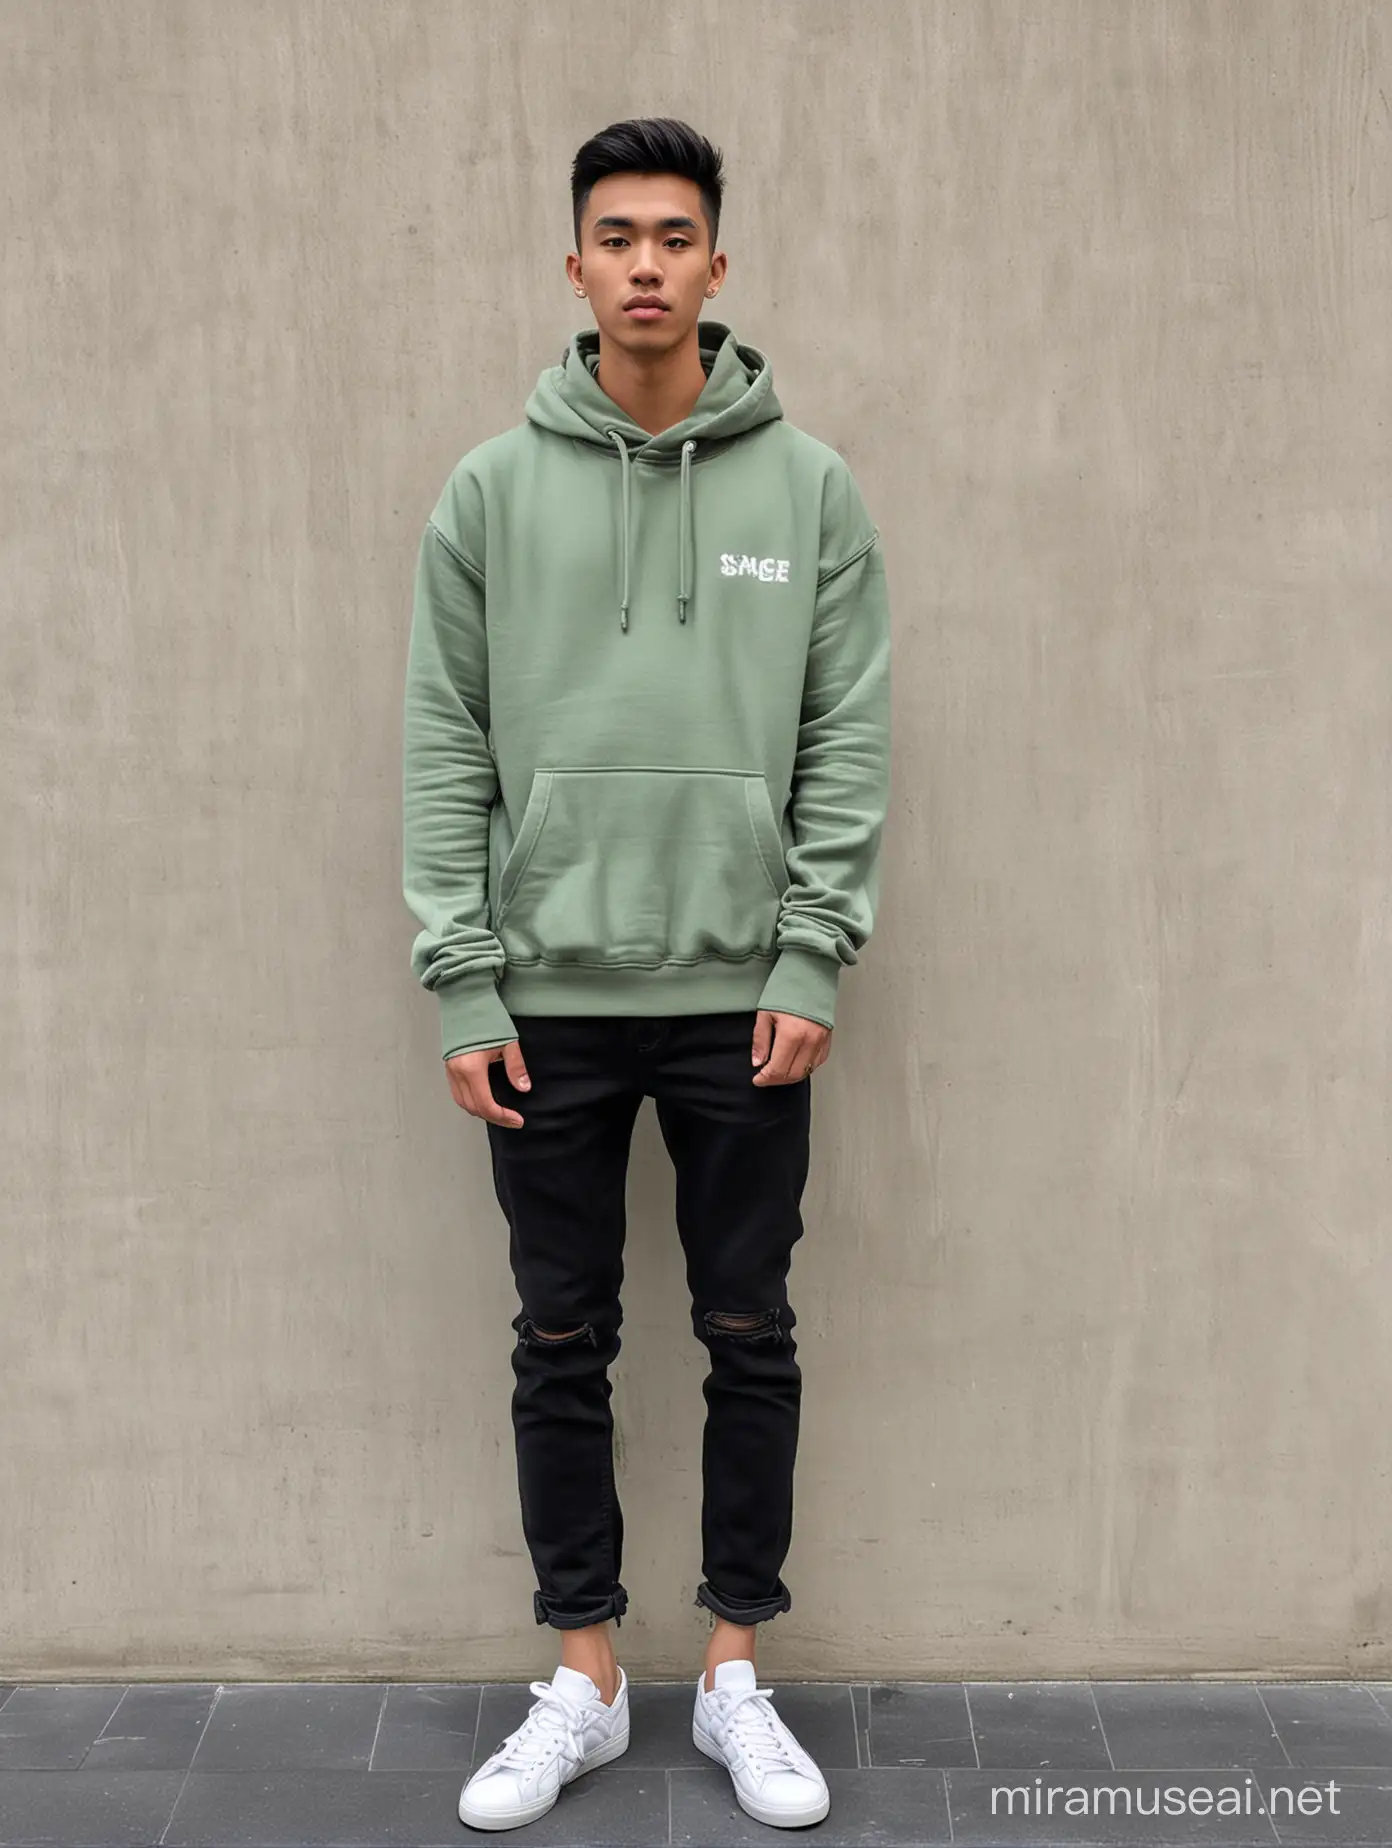 Indonesian man, 20 years old, wearing a Sage hoodie, black jeans, white shoes